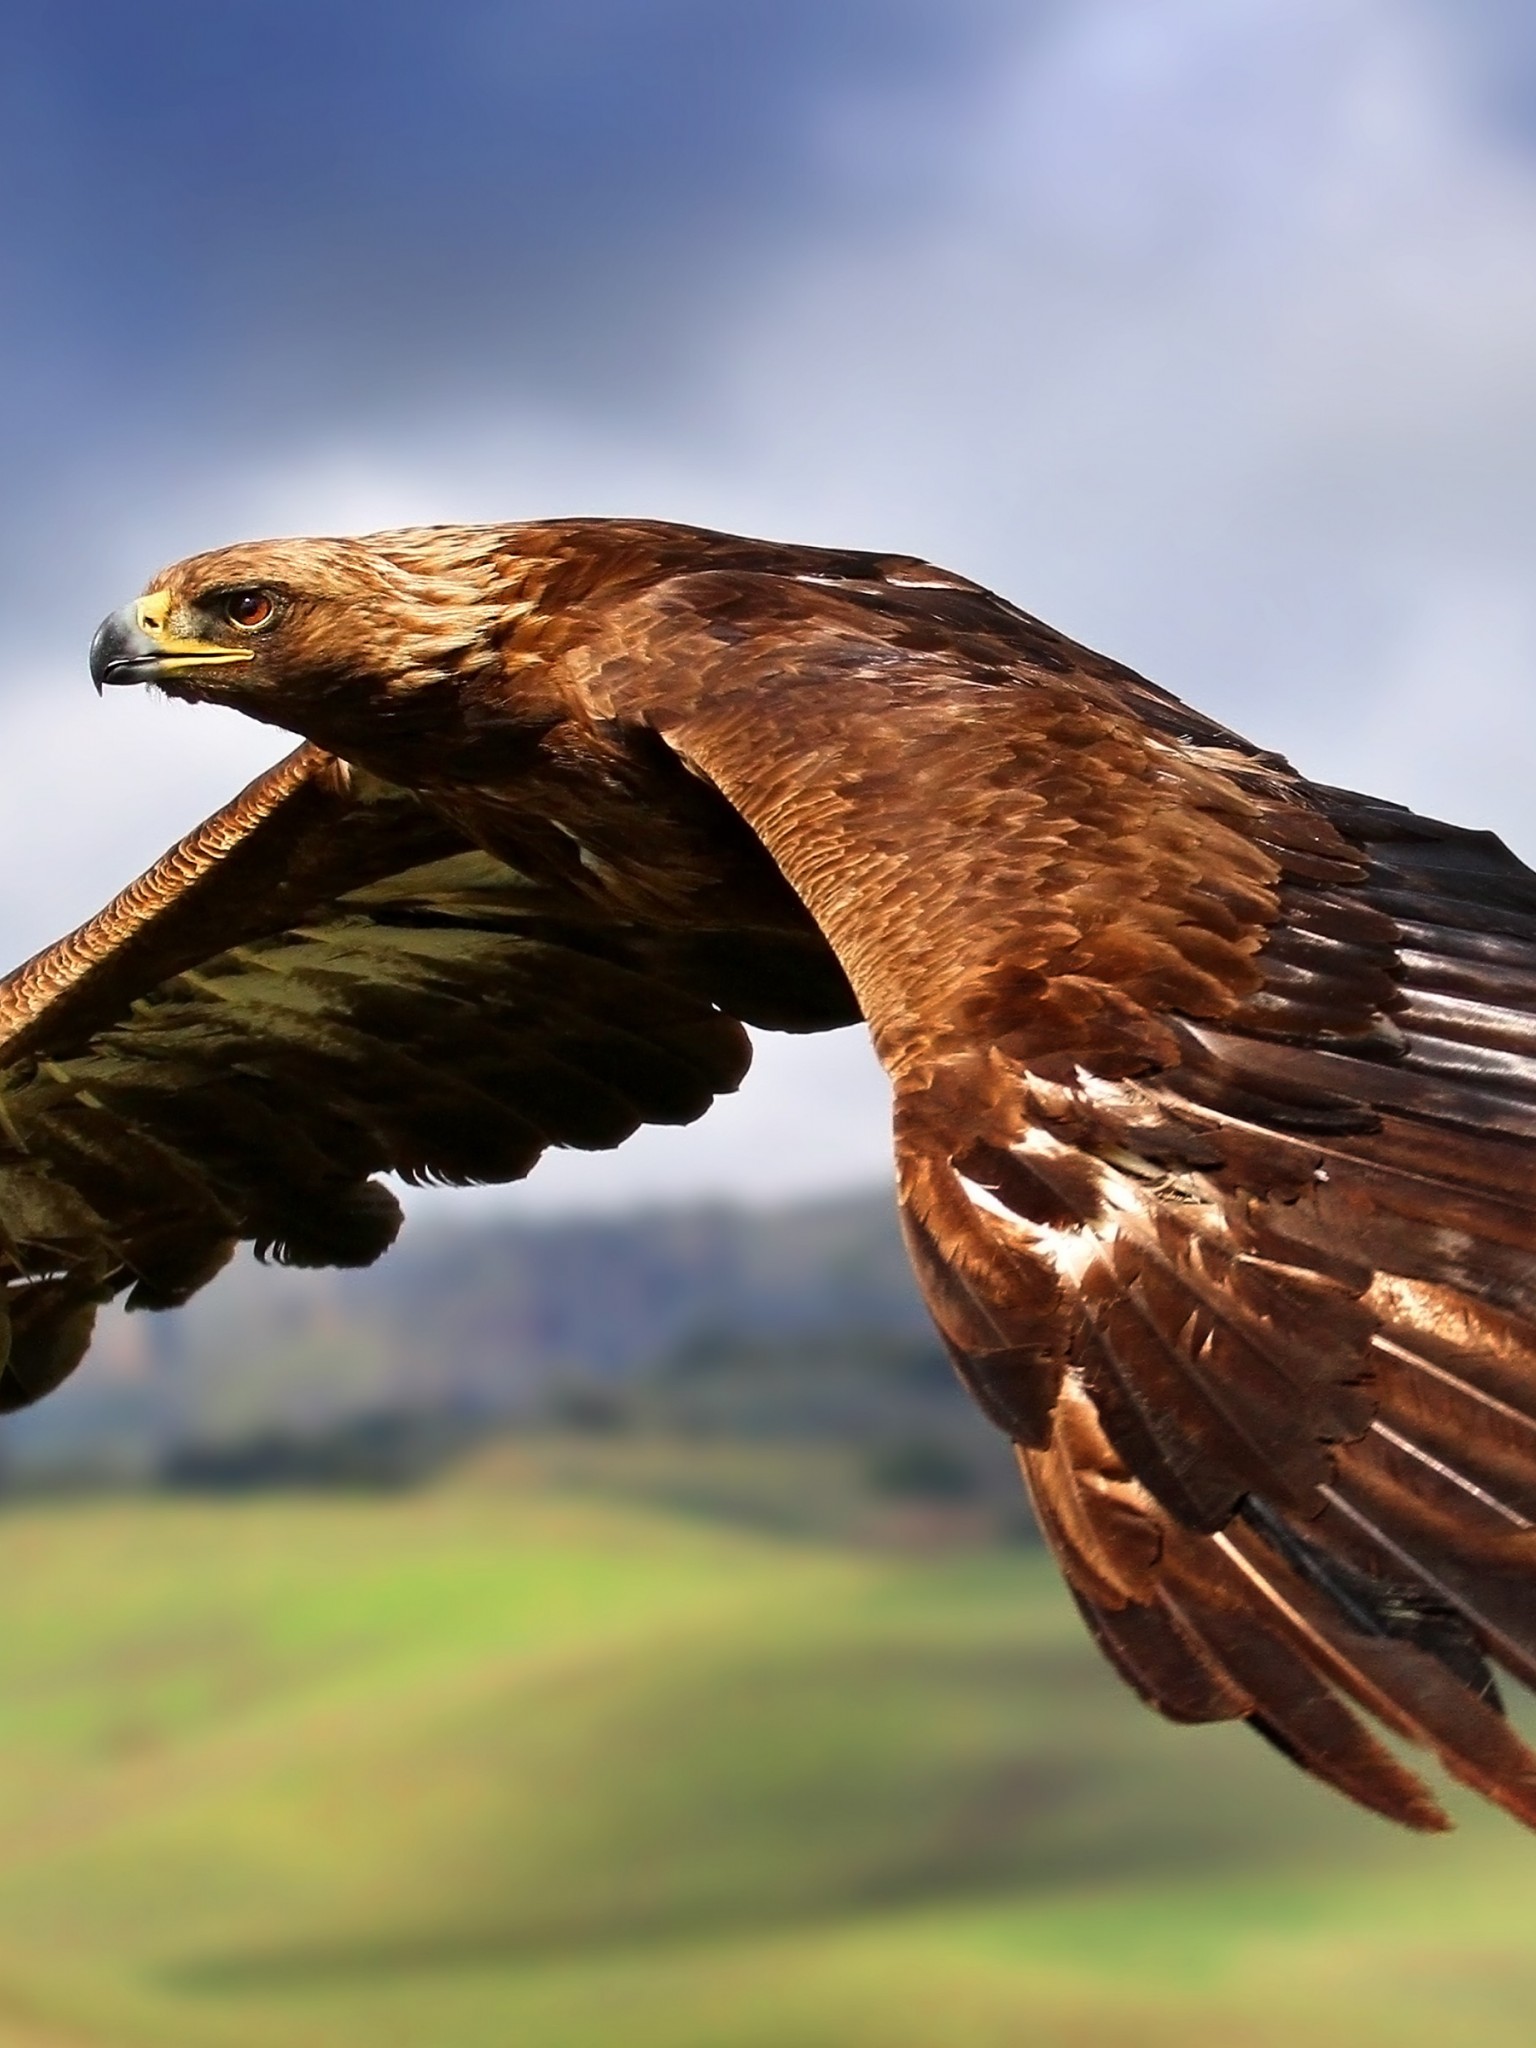 Free Download Golden and Mighty Eagle wallpaper